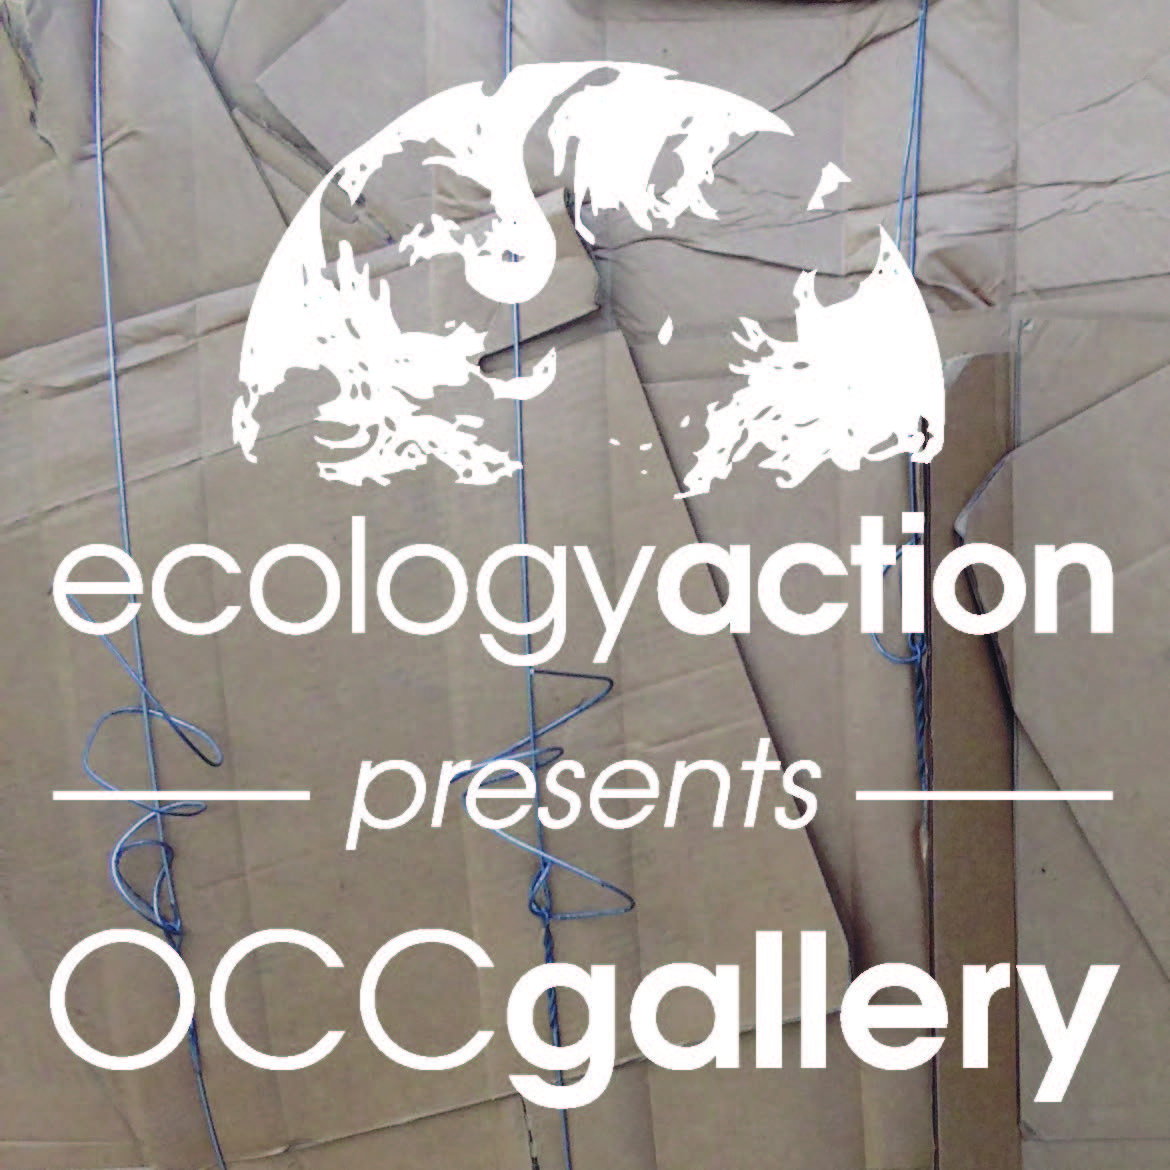  OCC gallery was a one night exhibition in Austin, TX on September 12, 2014 at  Ecology Action 's now defunct downtown recycling center.&nbsp;The show was conceived, constructed, and curated by  TJ Lemanski .&nbsp; 